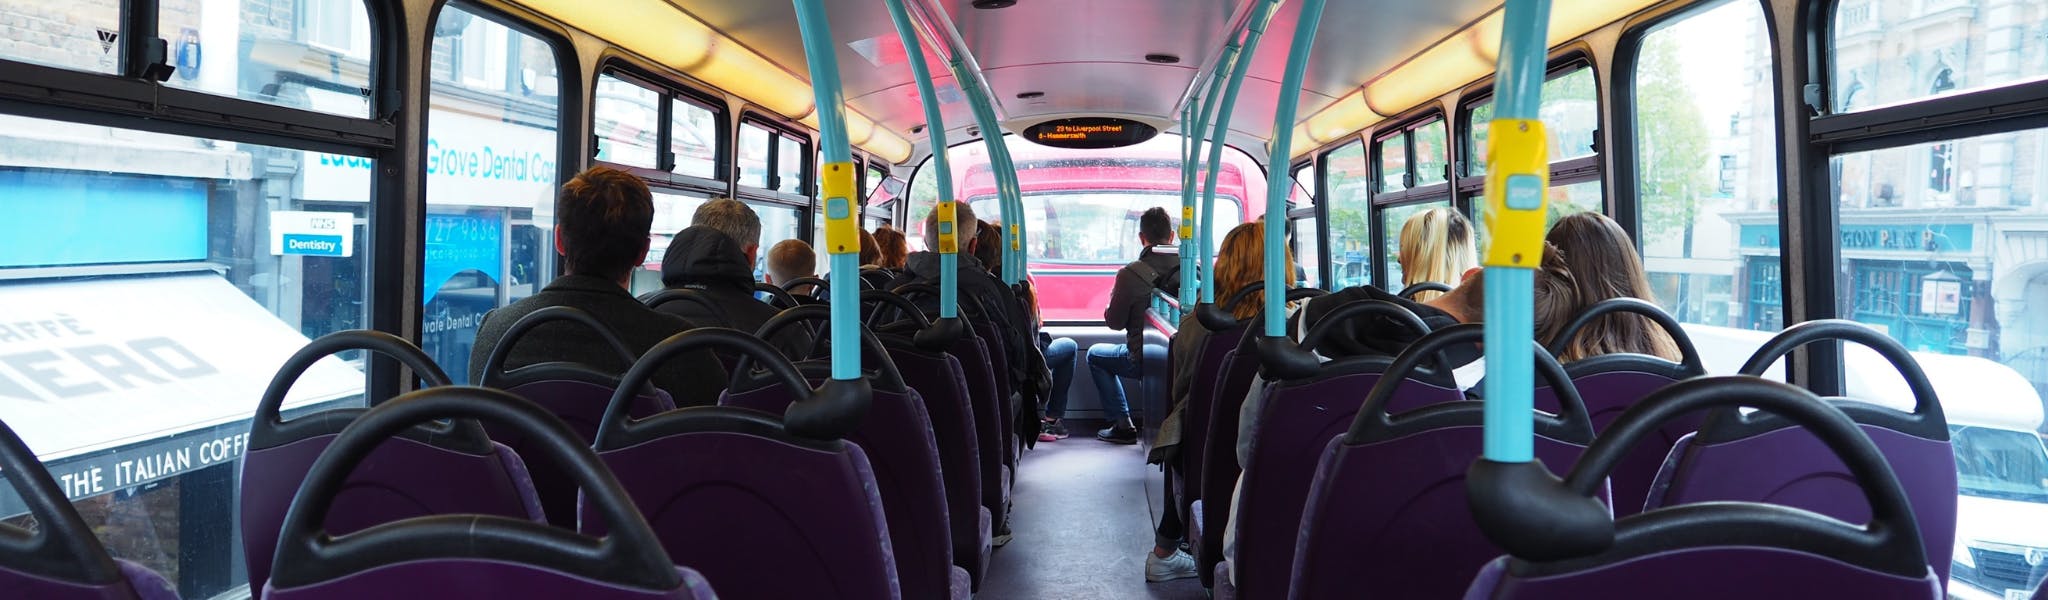 this is an image of the inside of a bus